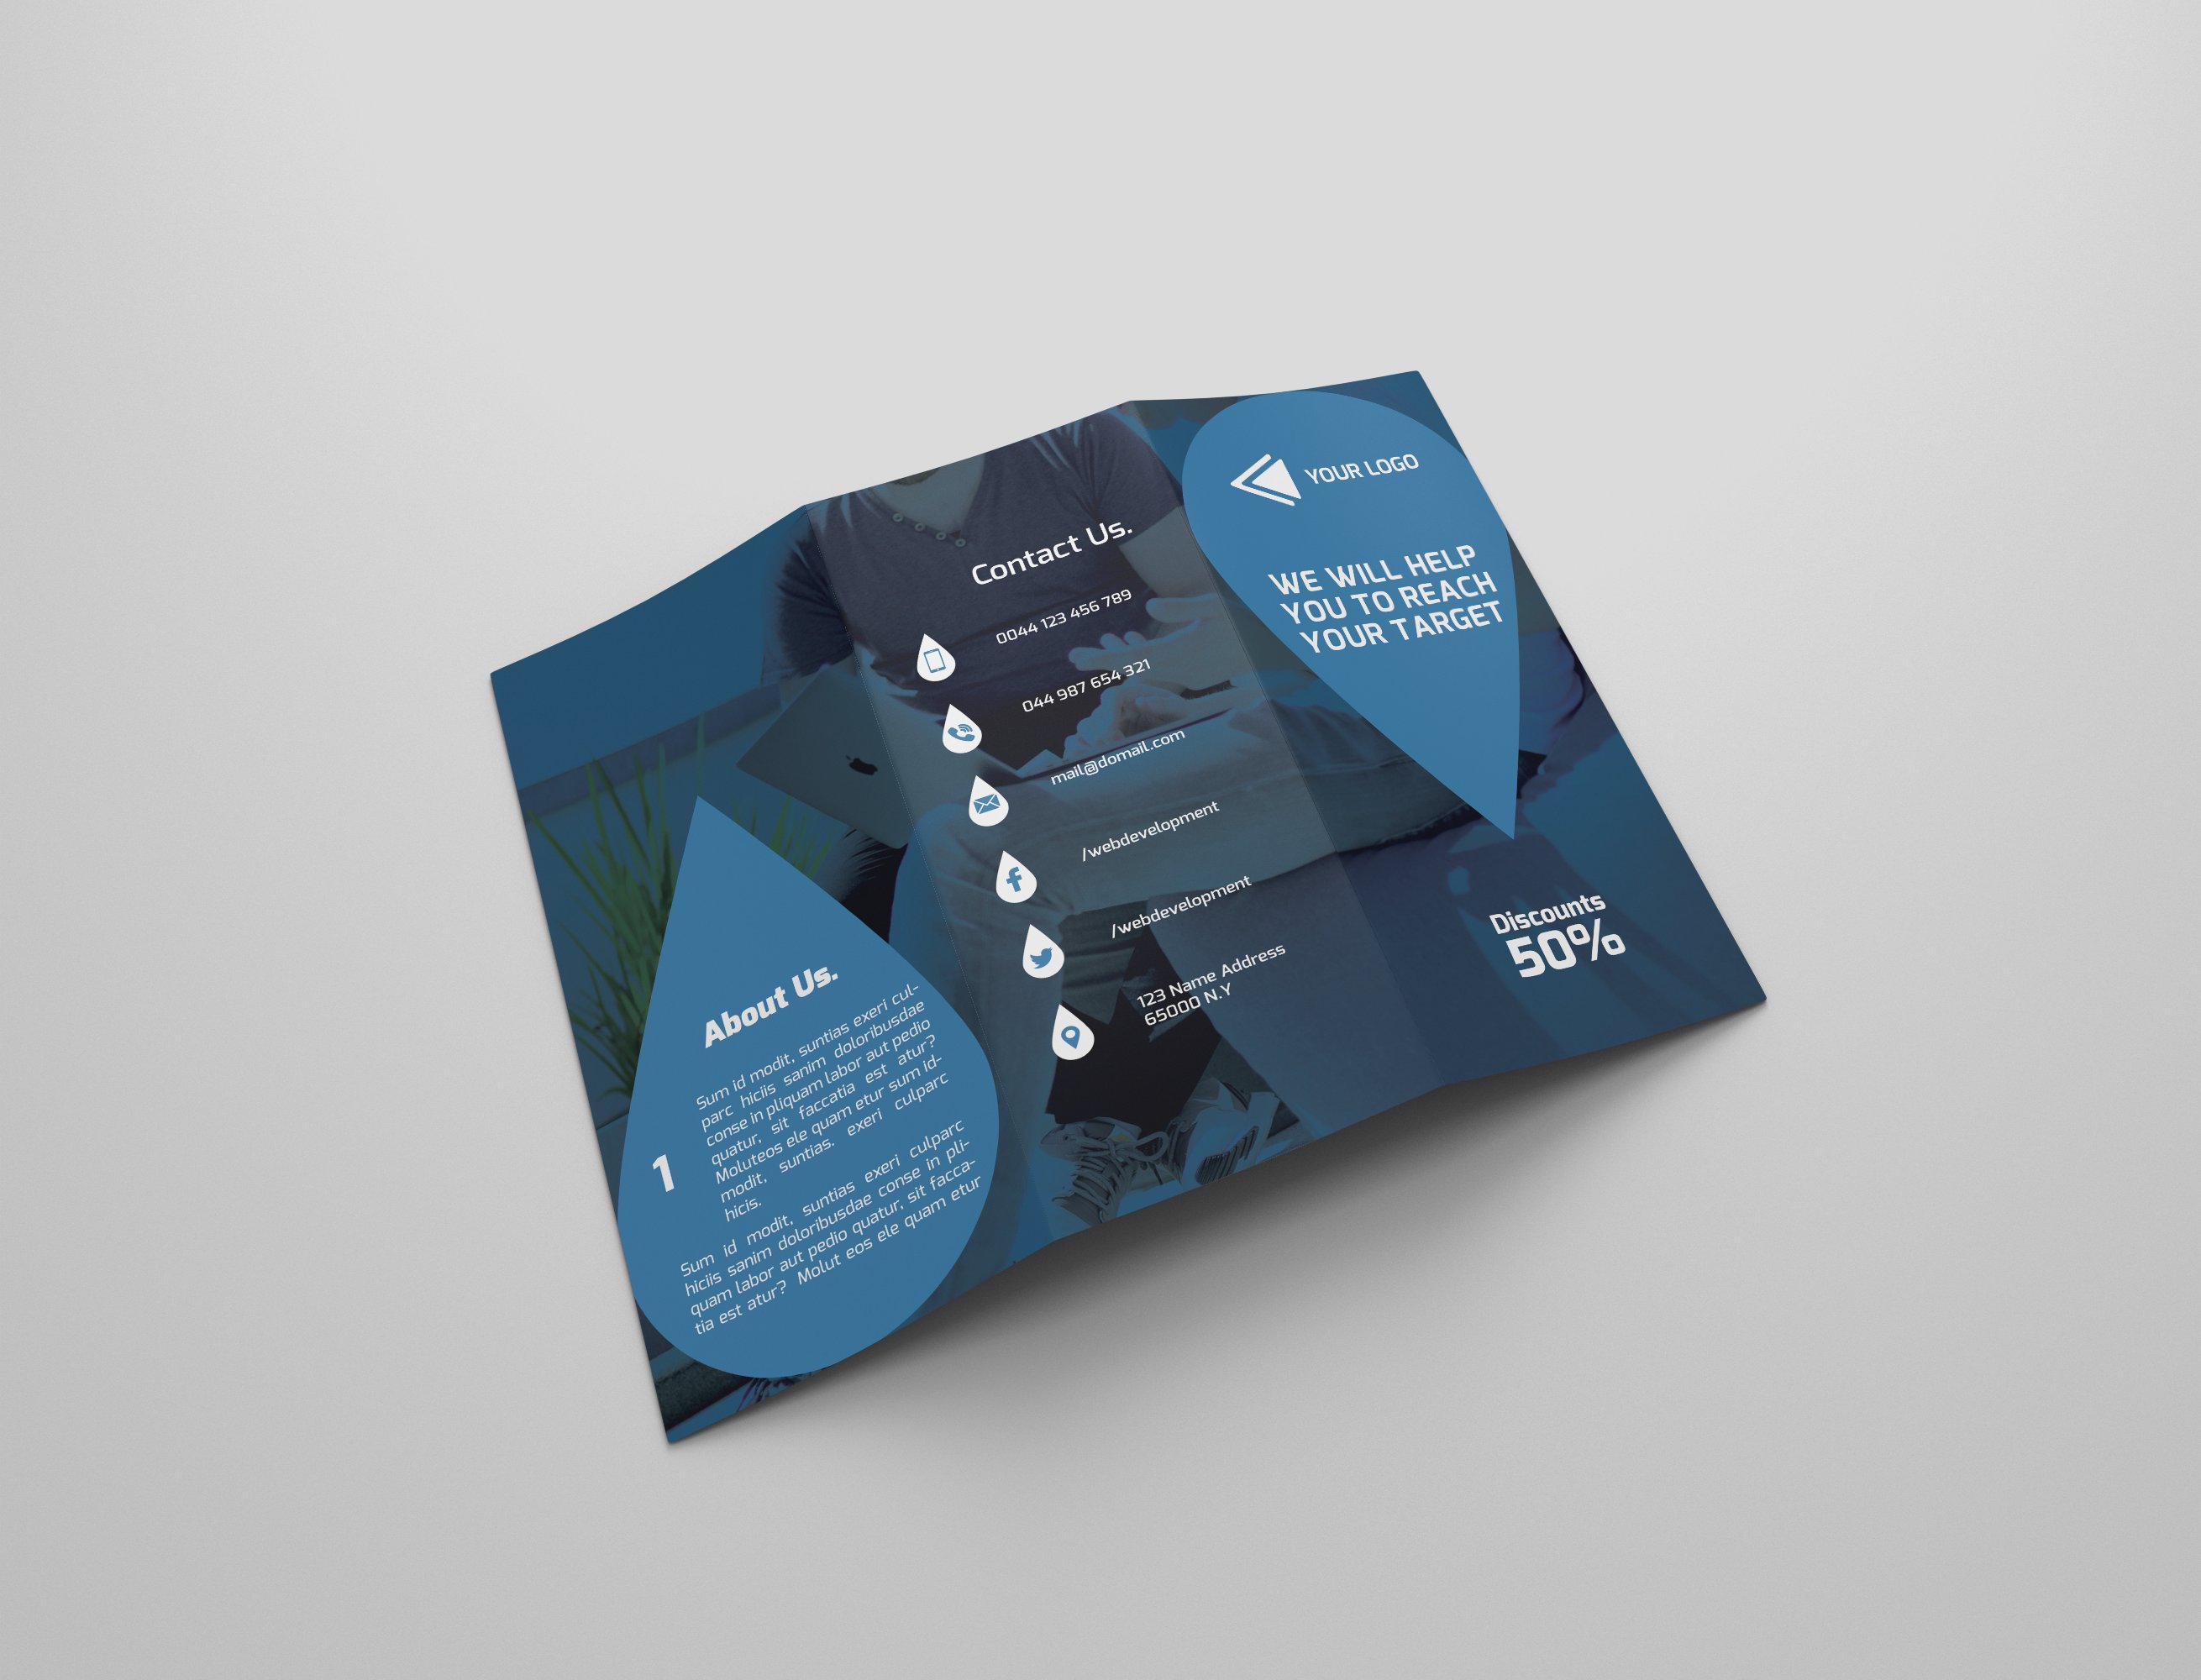 It Services Tri-fold Brochures cover image.